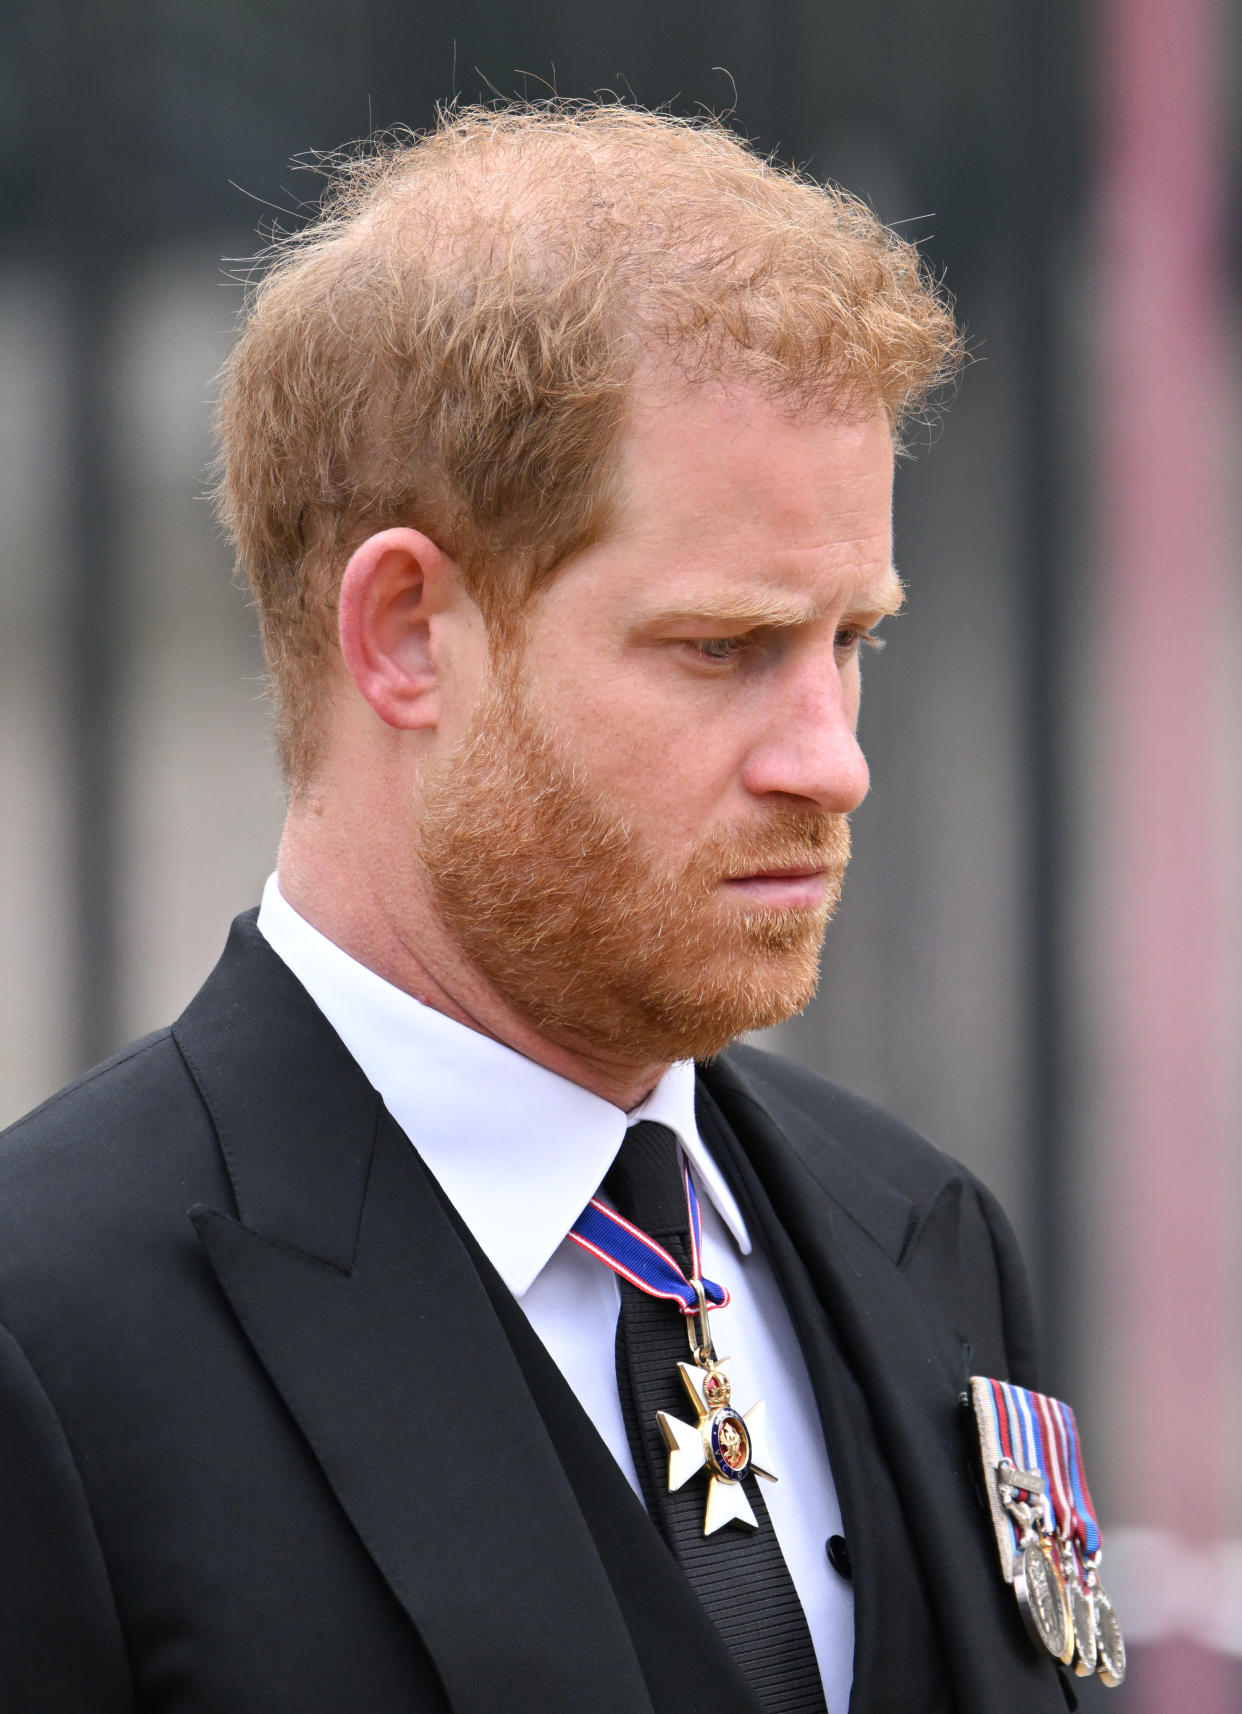  Prince Harry, Duke of Sussex at the State Funeral of Queen Elizabeth II 